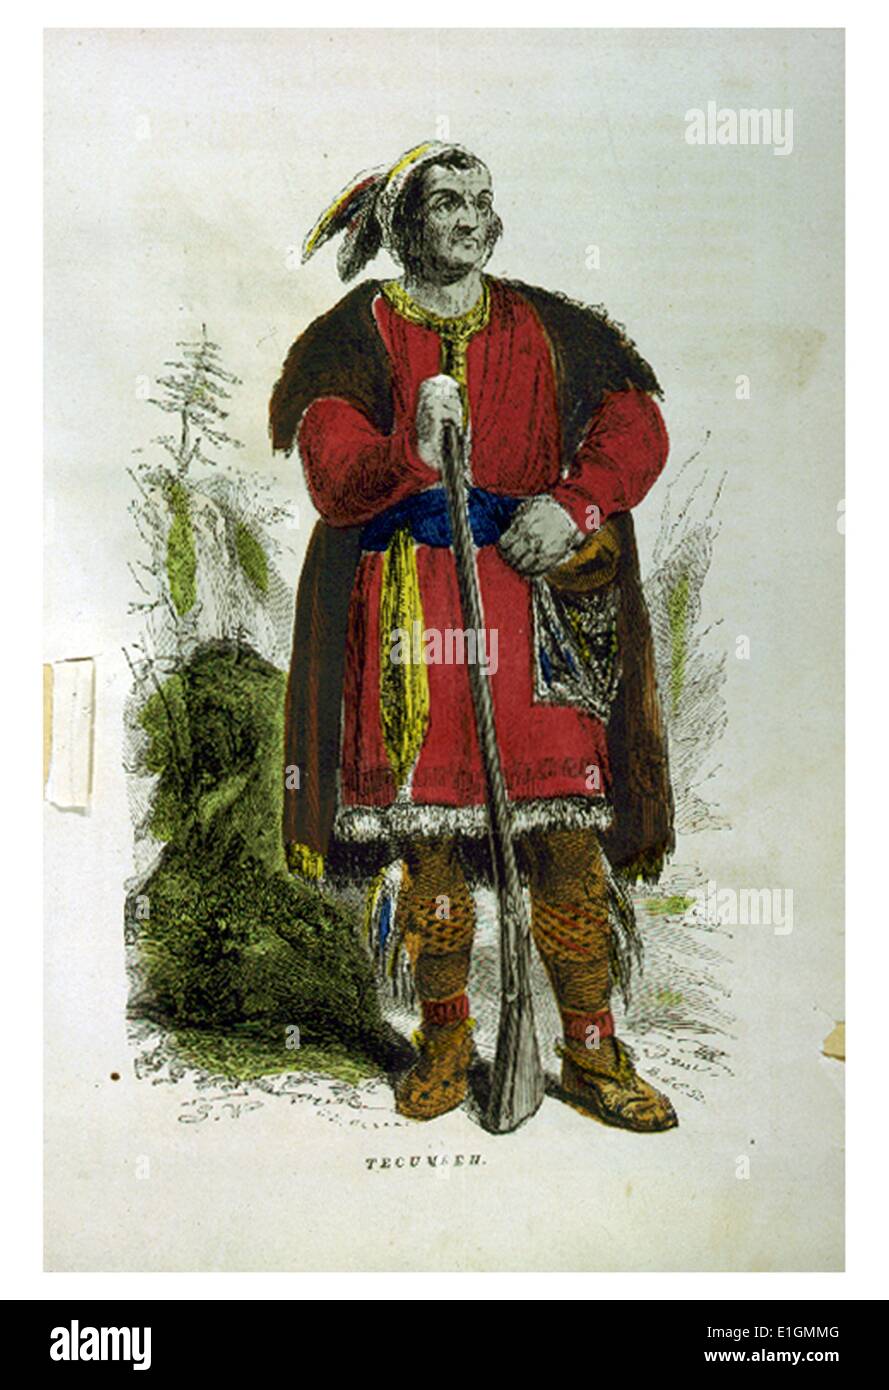 Print shows Tecumseh, full-length portrait, standing, facing slightly right, holding rifle. Stock Photo